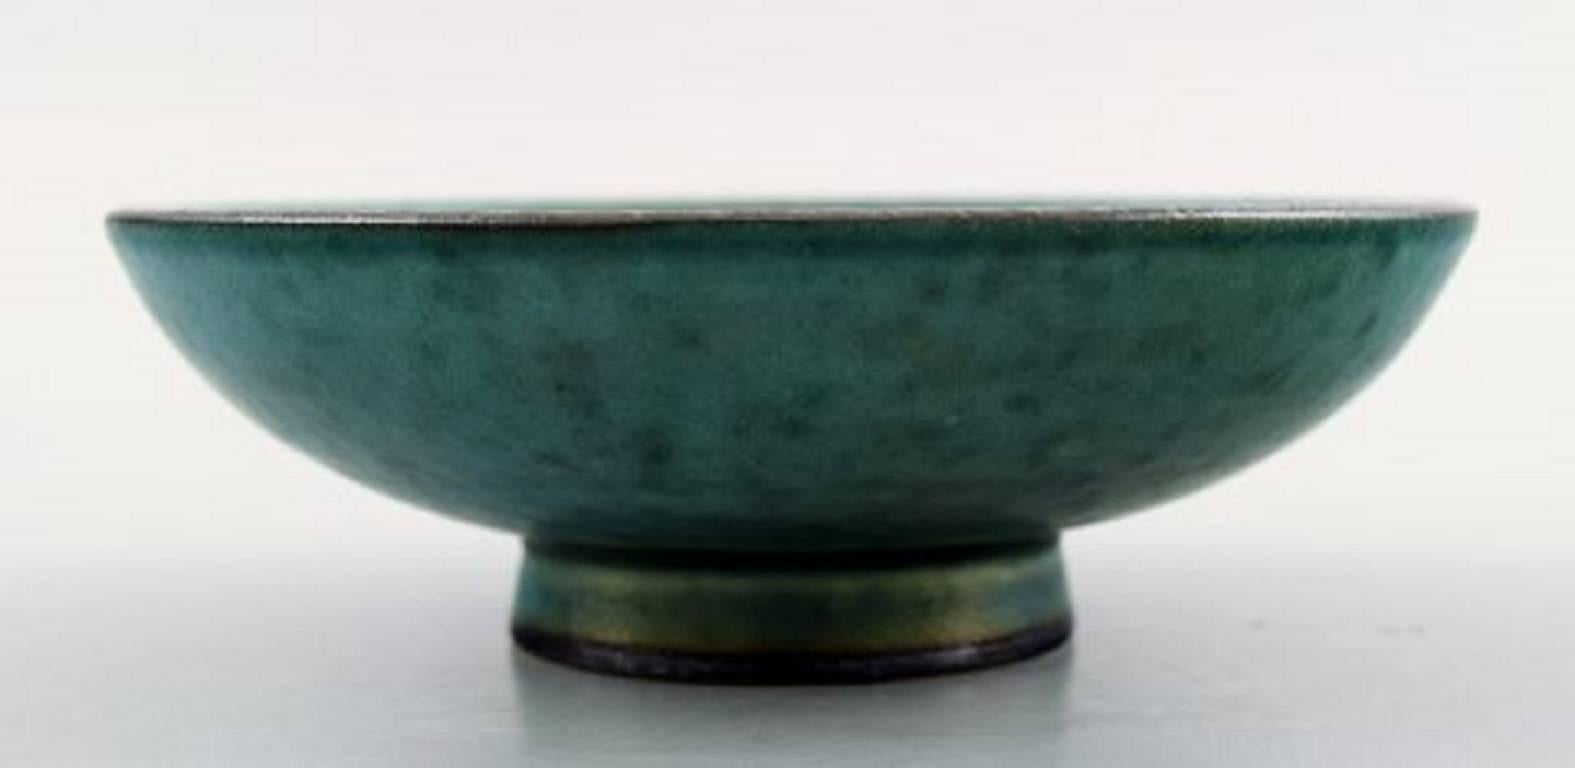 Two small bowls, stoneware, 1940s "Argenta", 
Wilhelm Kage for Gustavsberg 
Silver decoration on green background. 
Measures: Maximum 12 x 4 cm. 
In perfect condition.